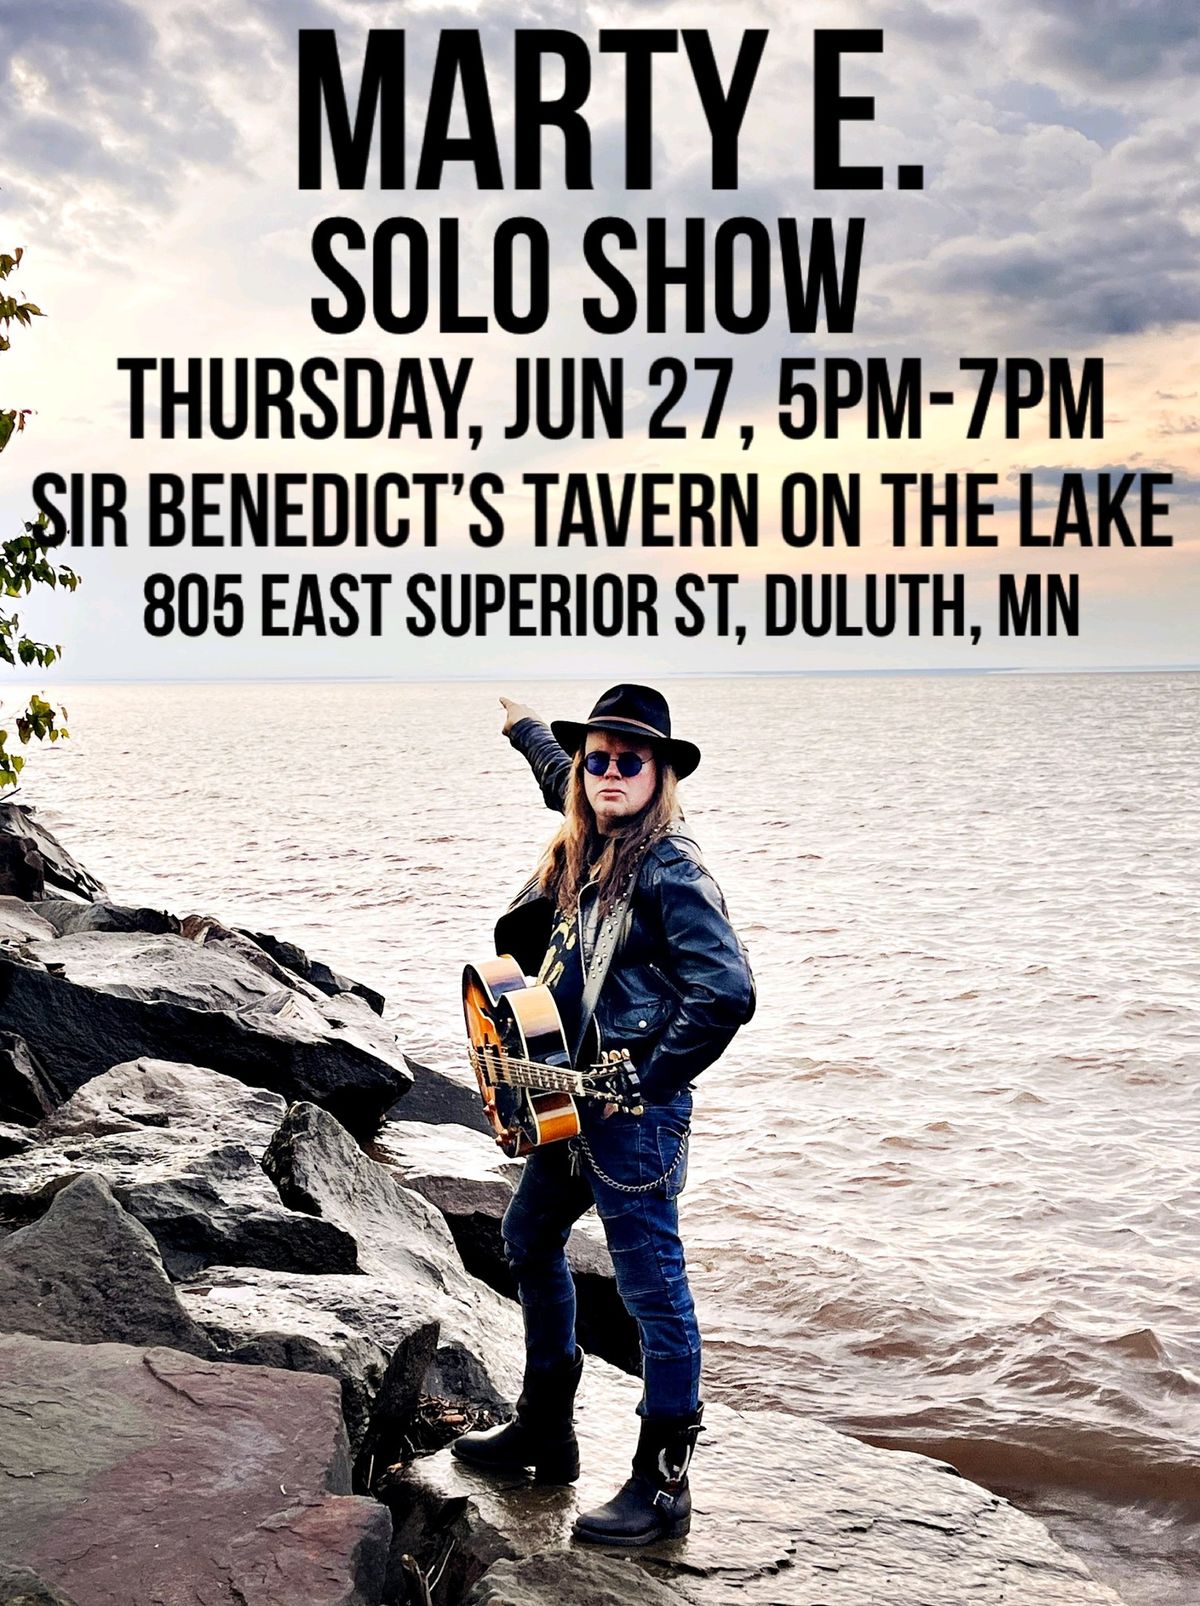 Marty E. solo show in Duluth